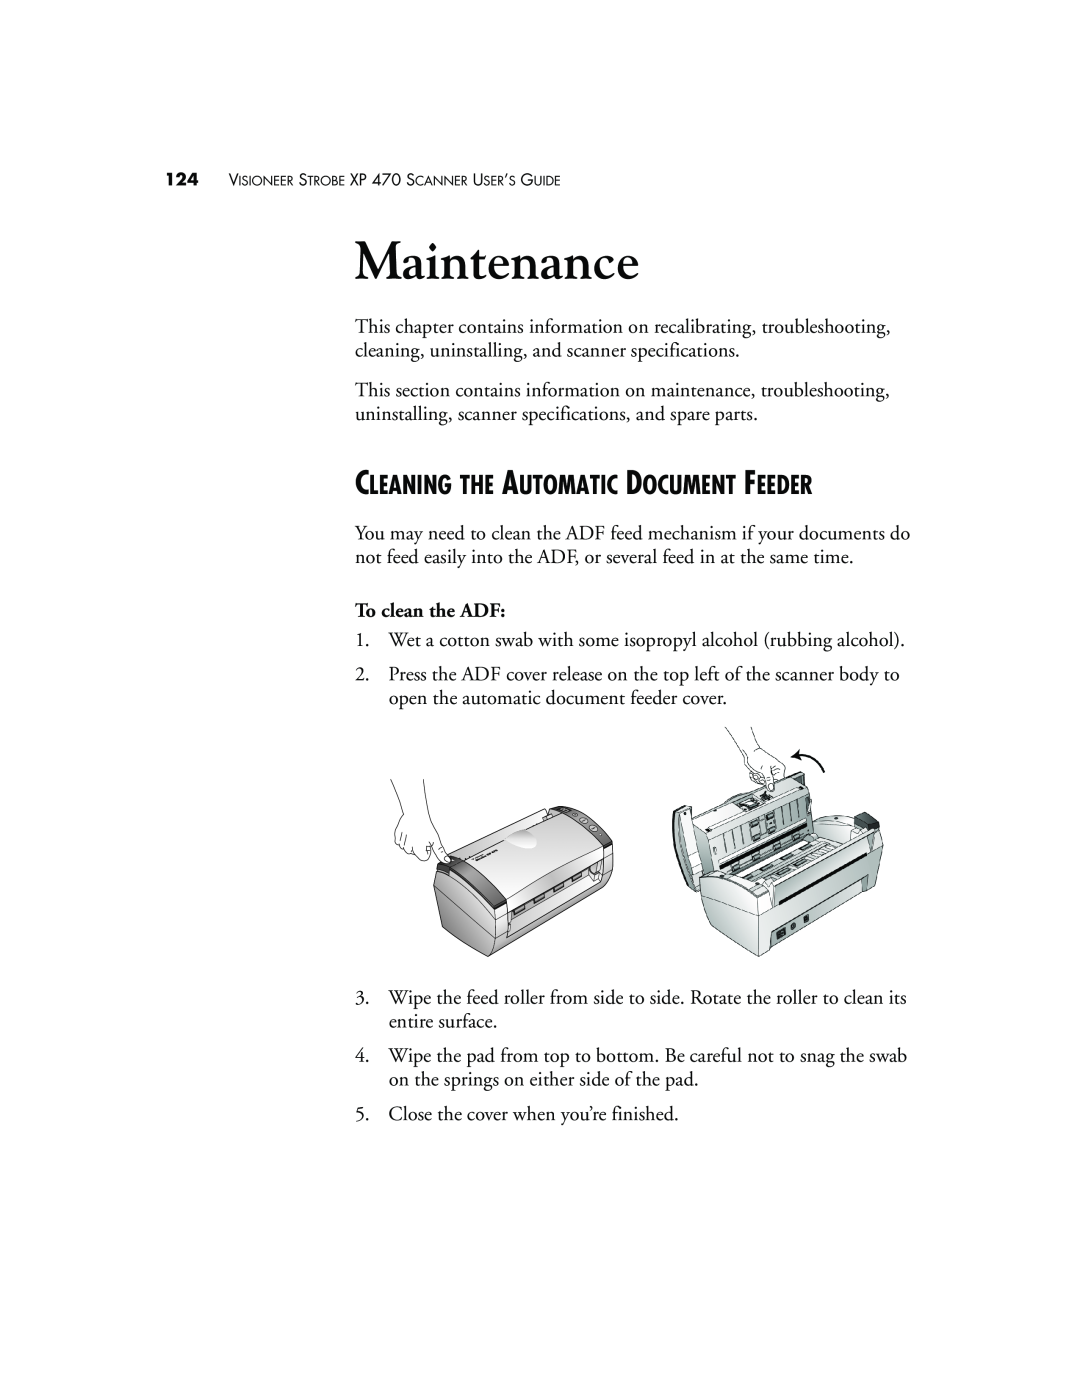 Visioneer XP 470 manual Maintenance, Cleaning The Automatic Document Feeder 